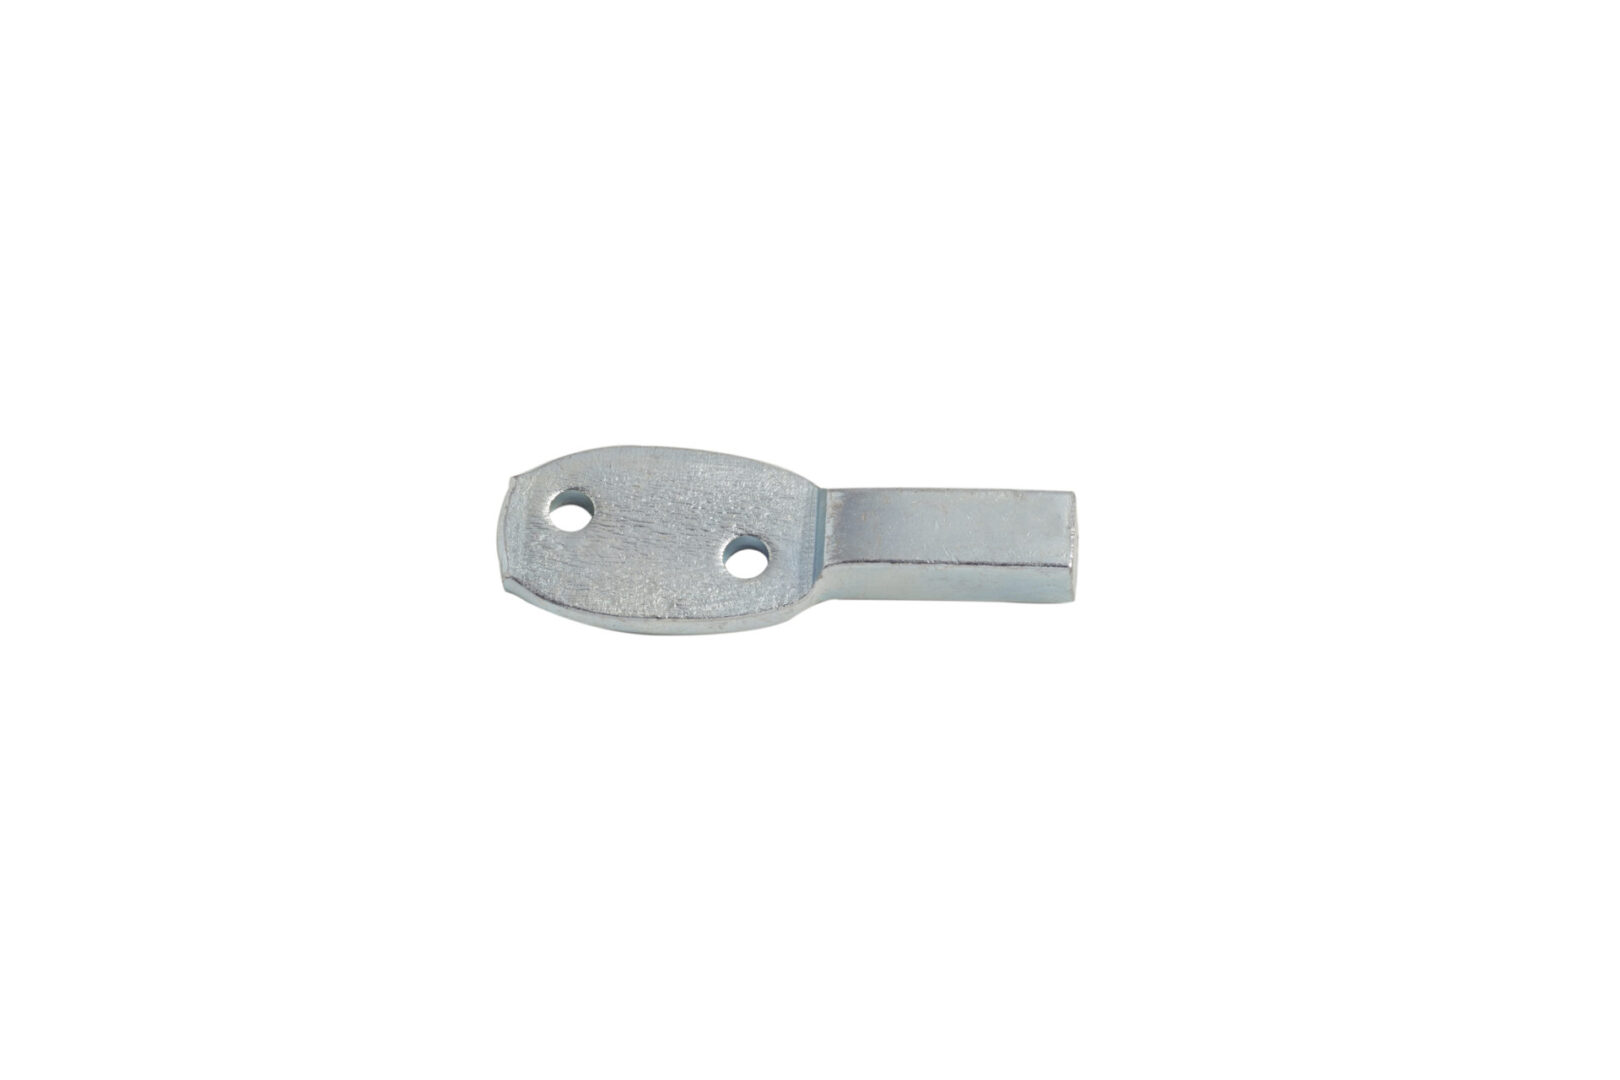 A 620 Square End Bearing with no cuts, isolated on a white background.